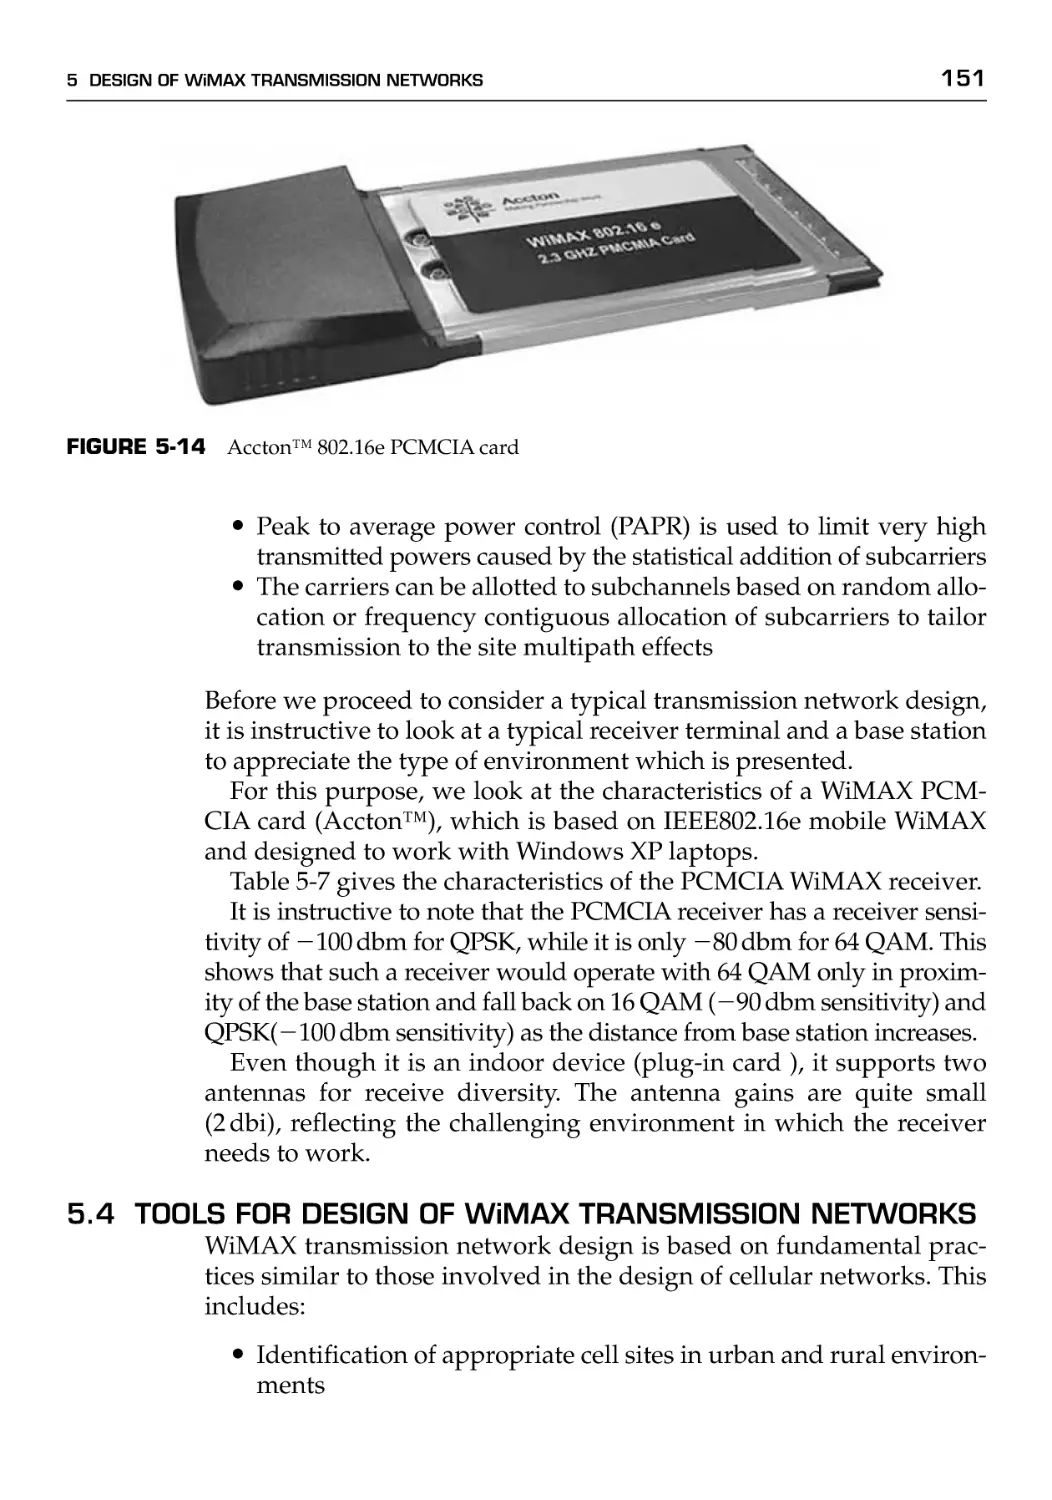 5.4 Tools for Design of WiMAX Transmission Networks